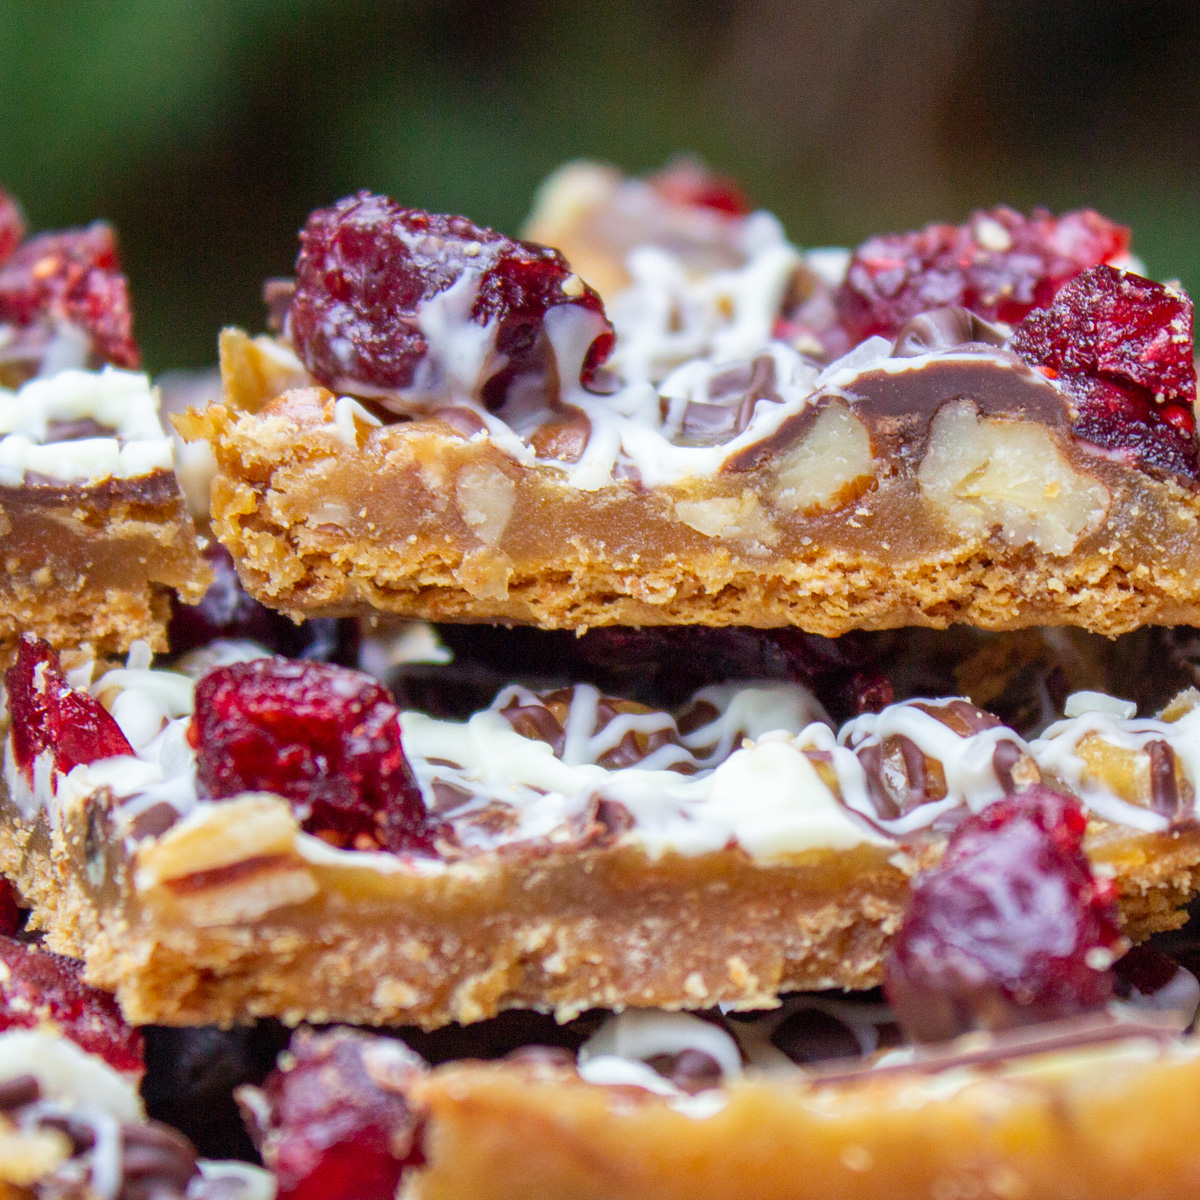 Toffee Bars With Chocolate, Nuts and Cranberries